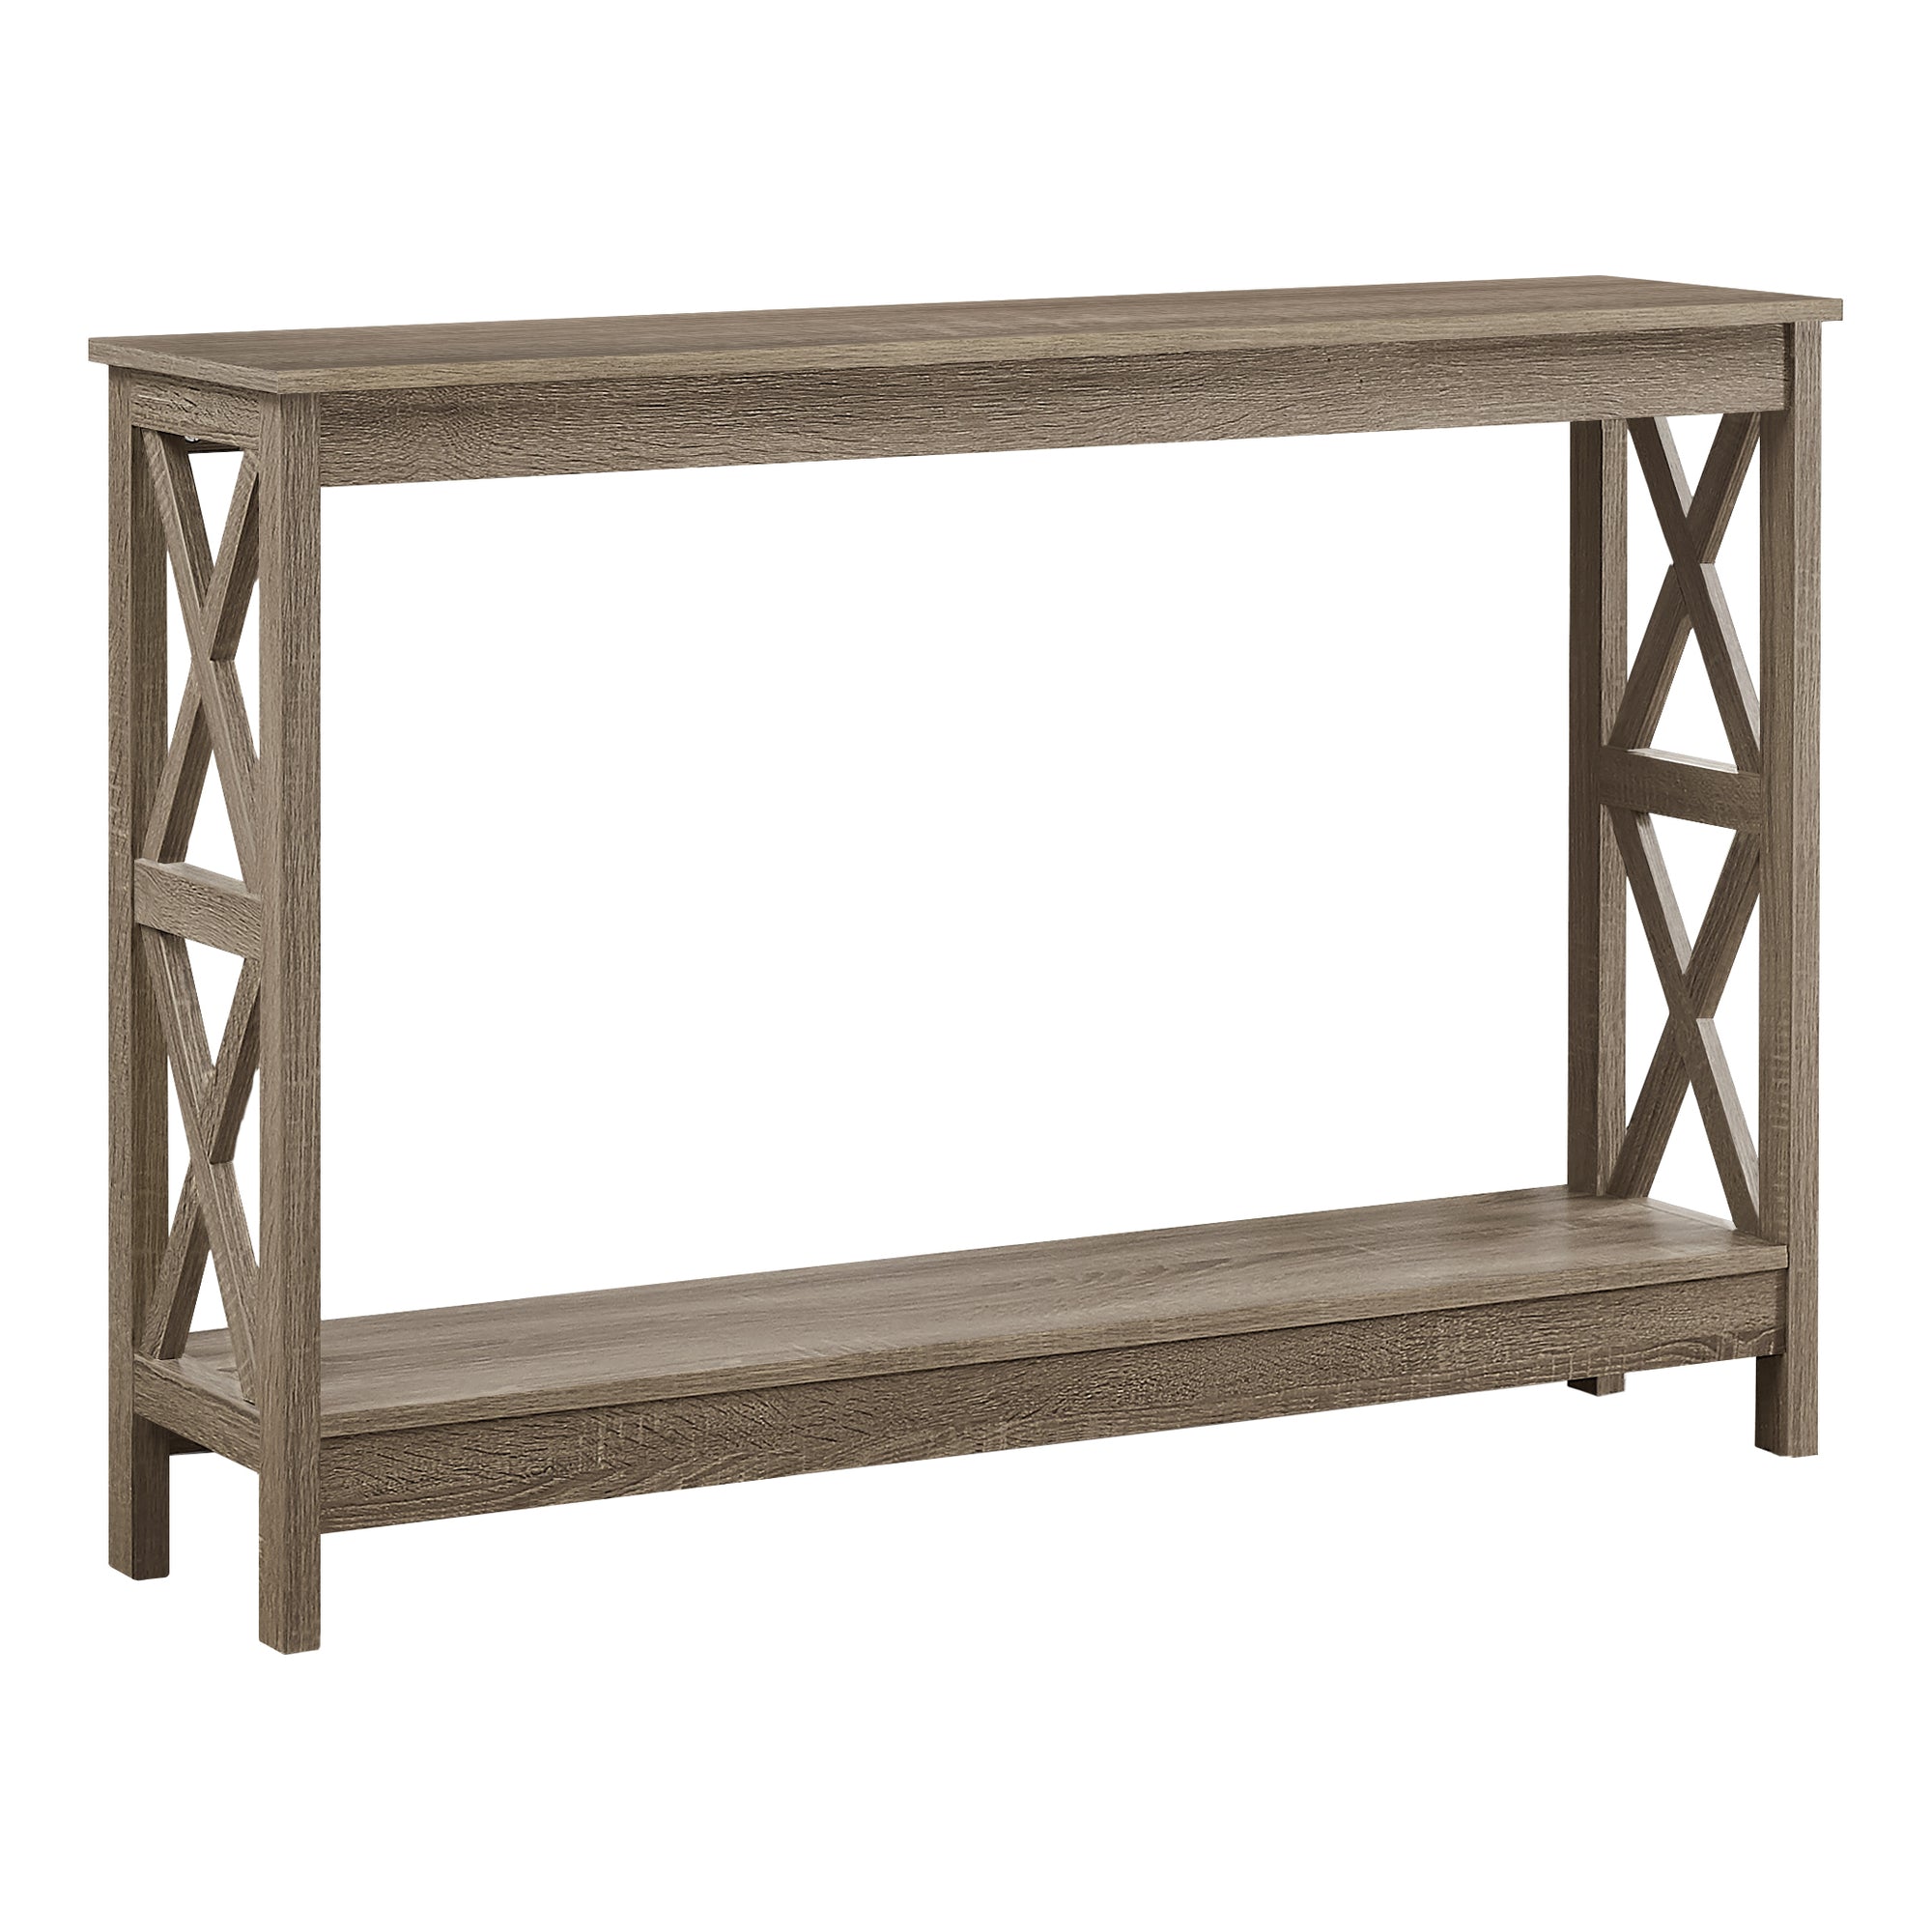 Accent Table - 48L / Dark Taupe Hall Console